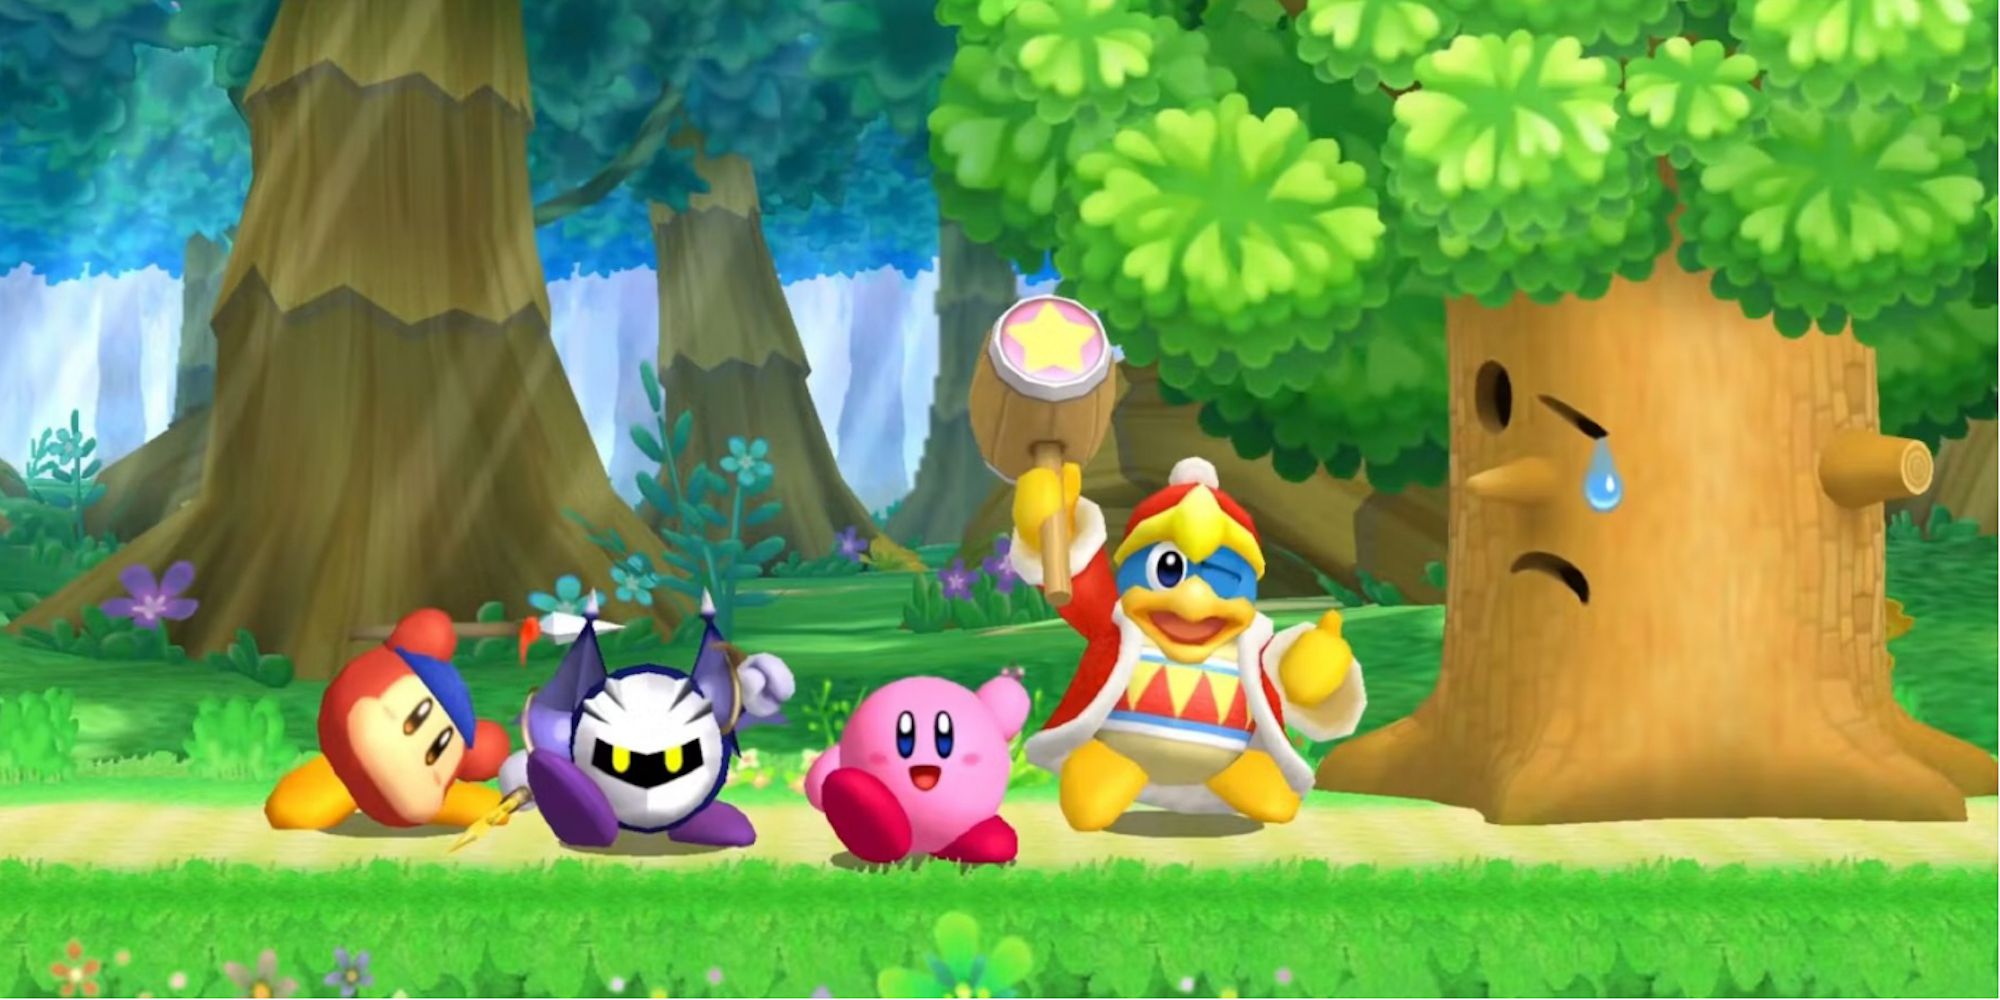 A cutscene featuring characters in Kirby’s Return to Dreamland